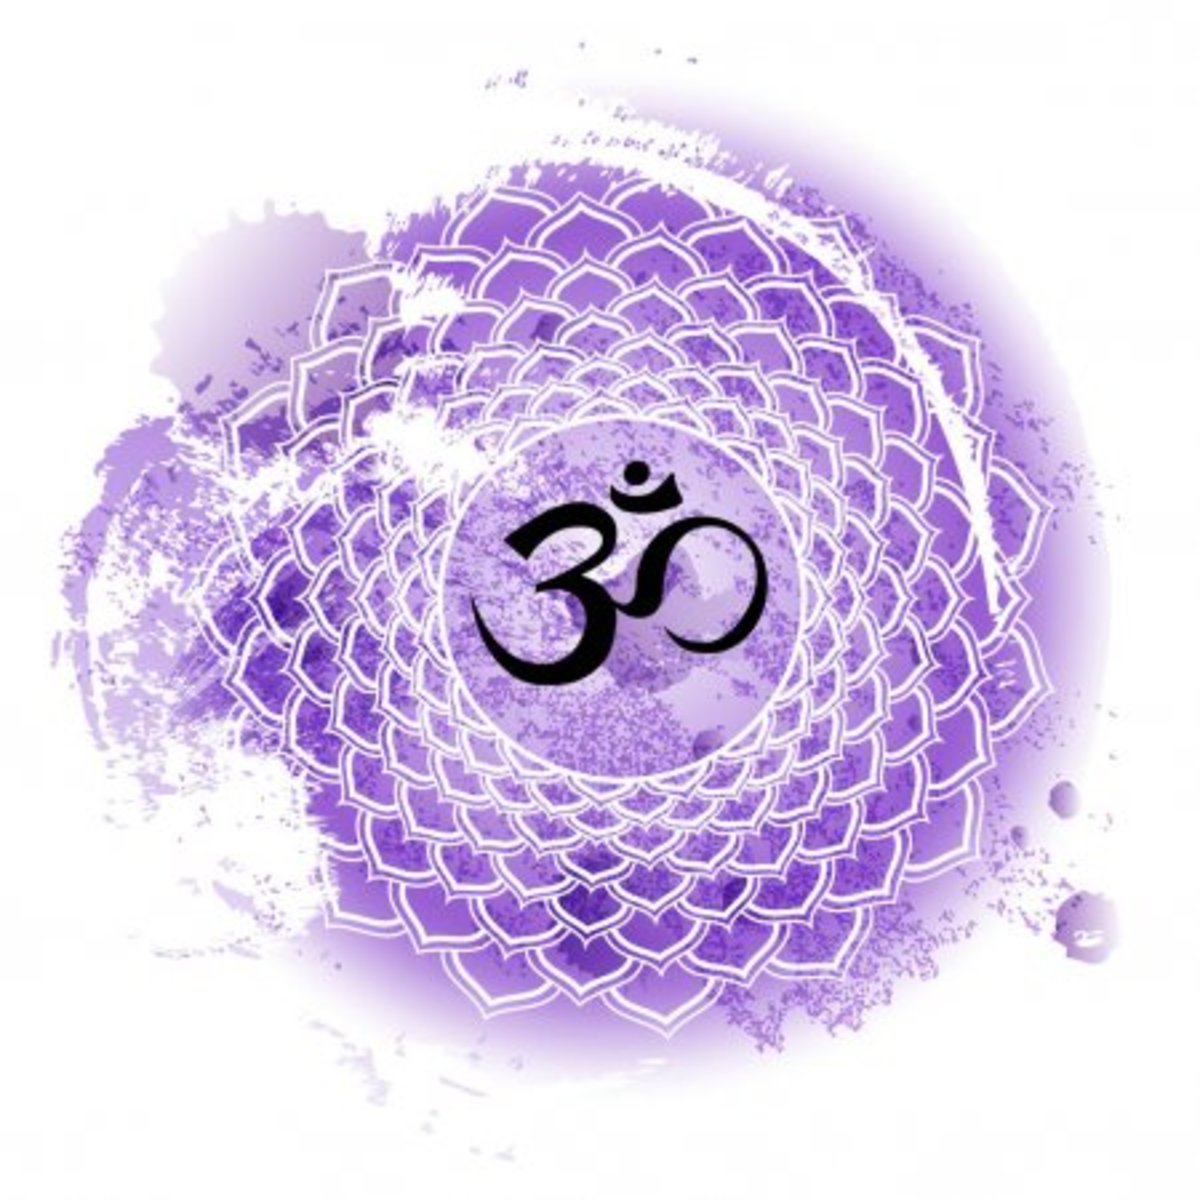 The crown chakra, most often represented with a violet hue, is the chakra that is associated with spiritual awareness.